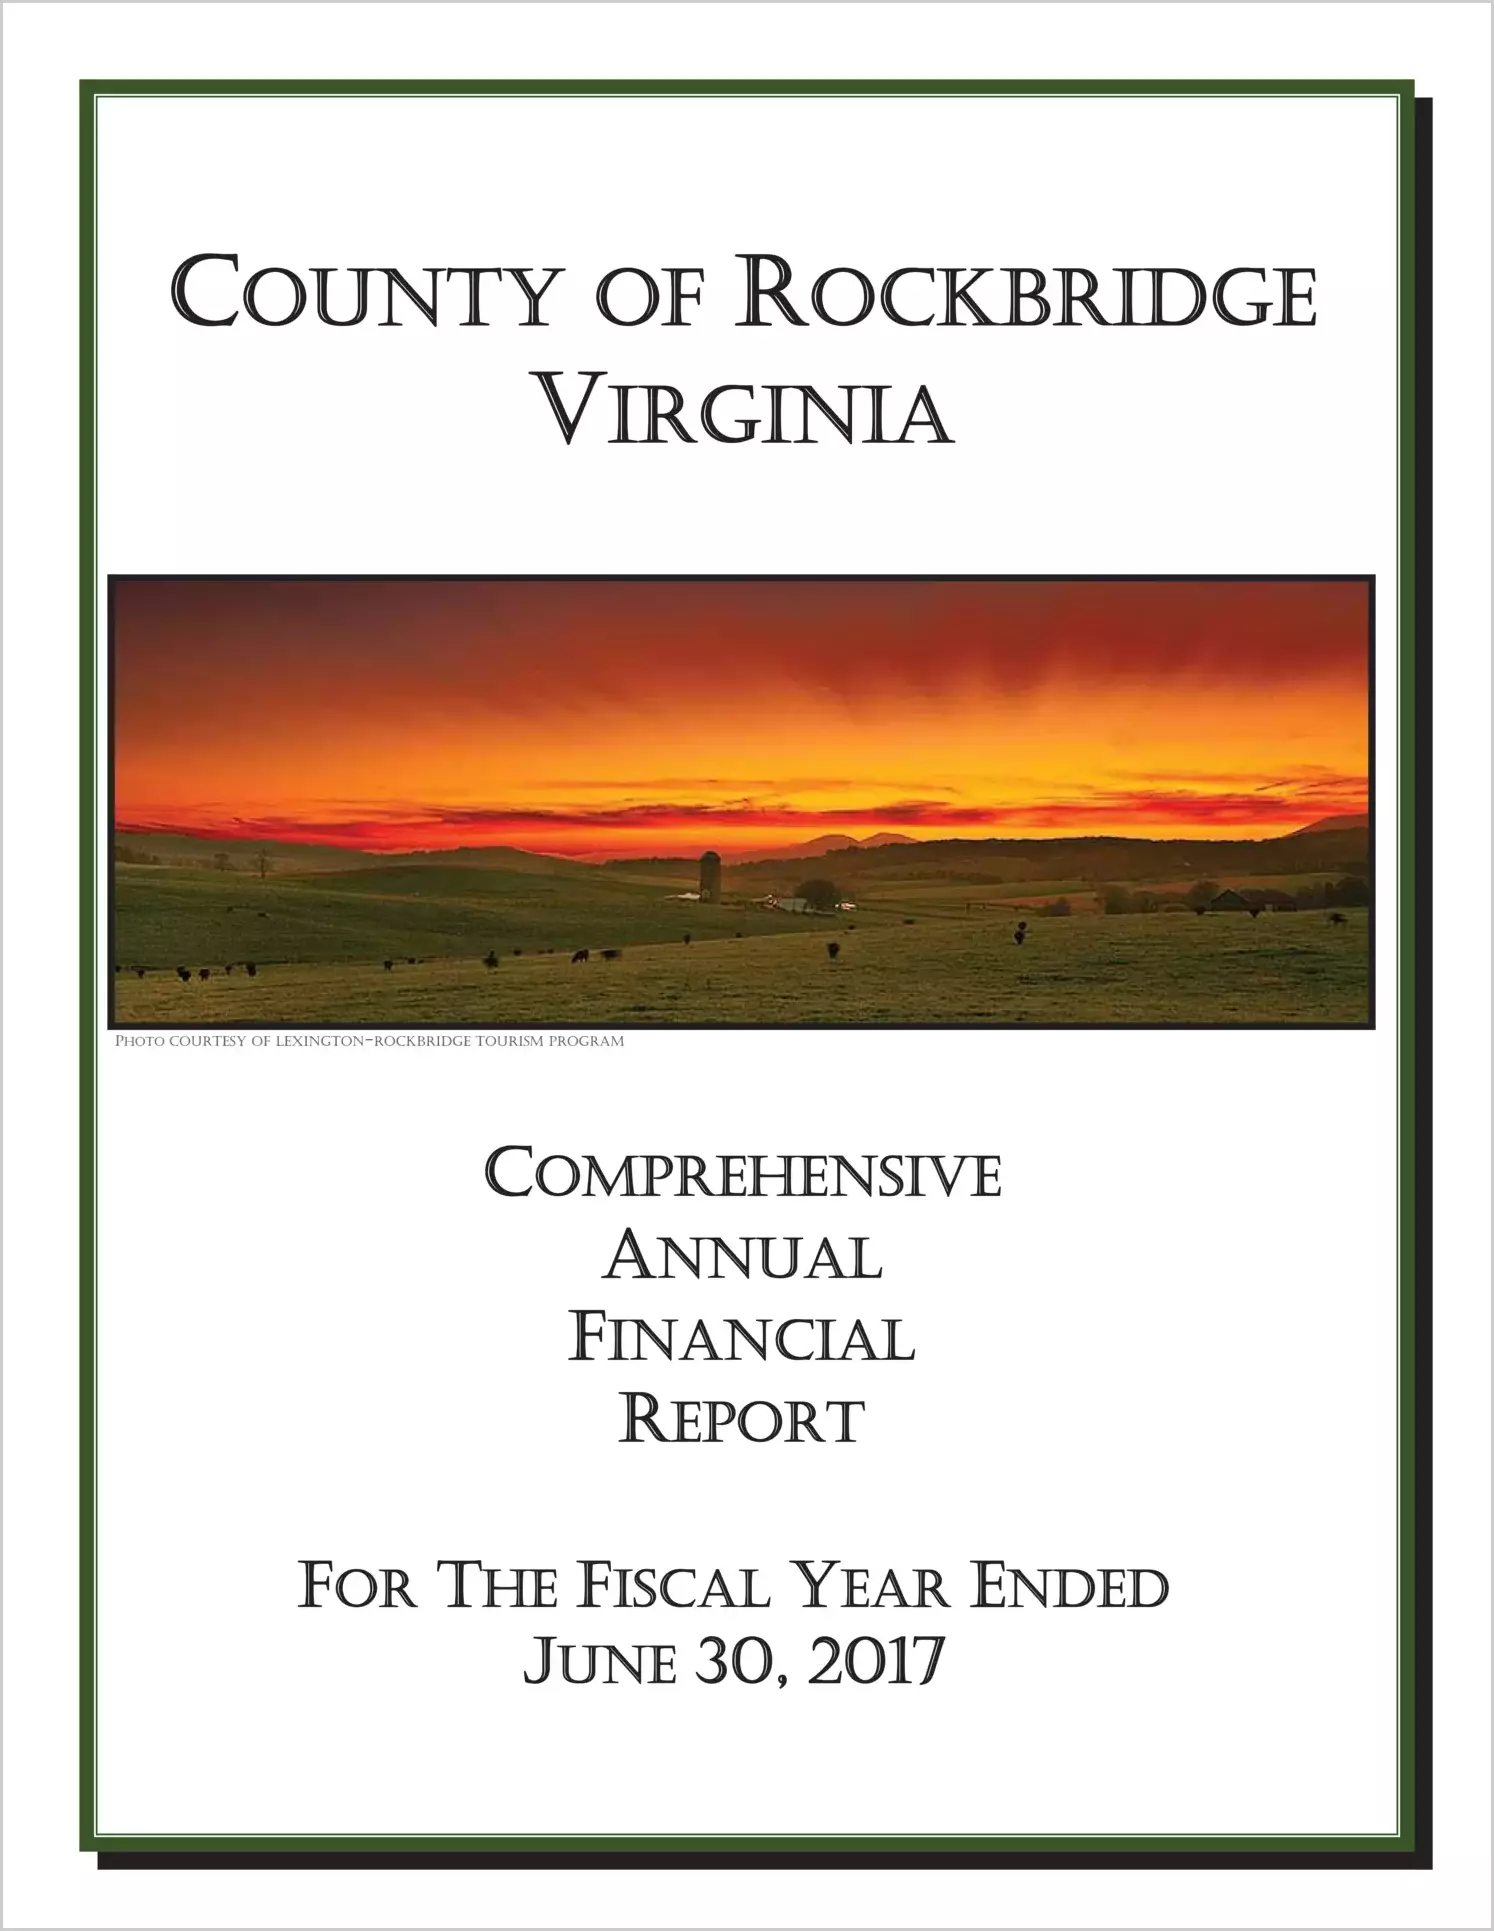 2017 Annual Financial Report for County of Rockbridge